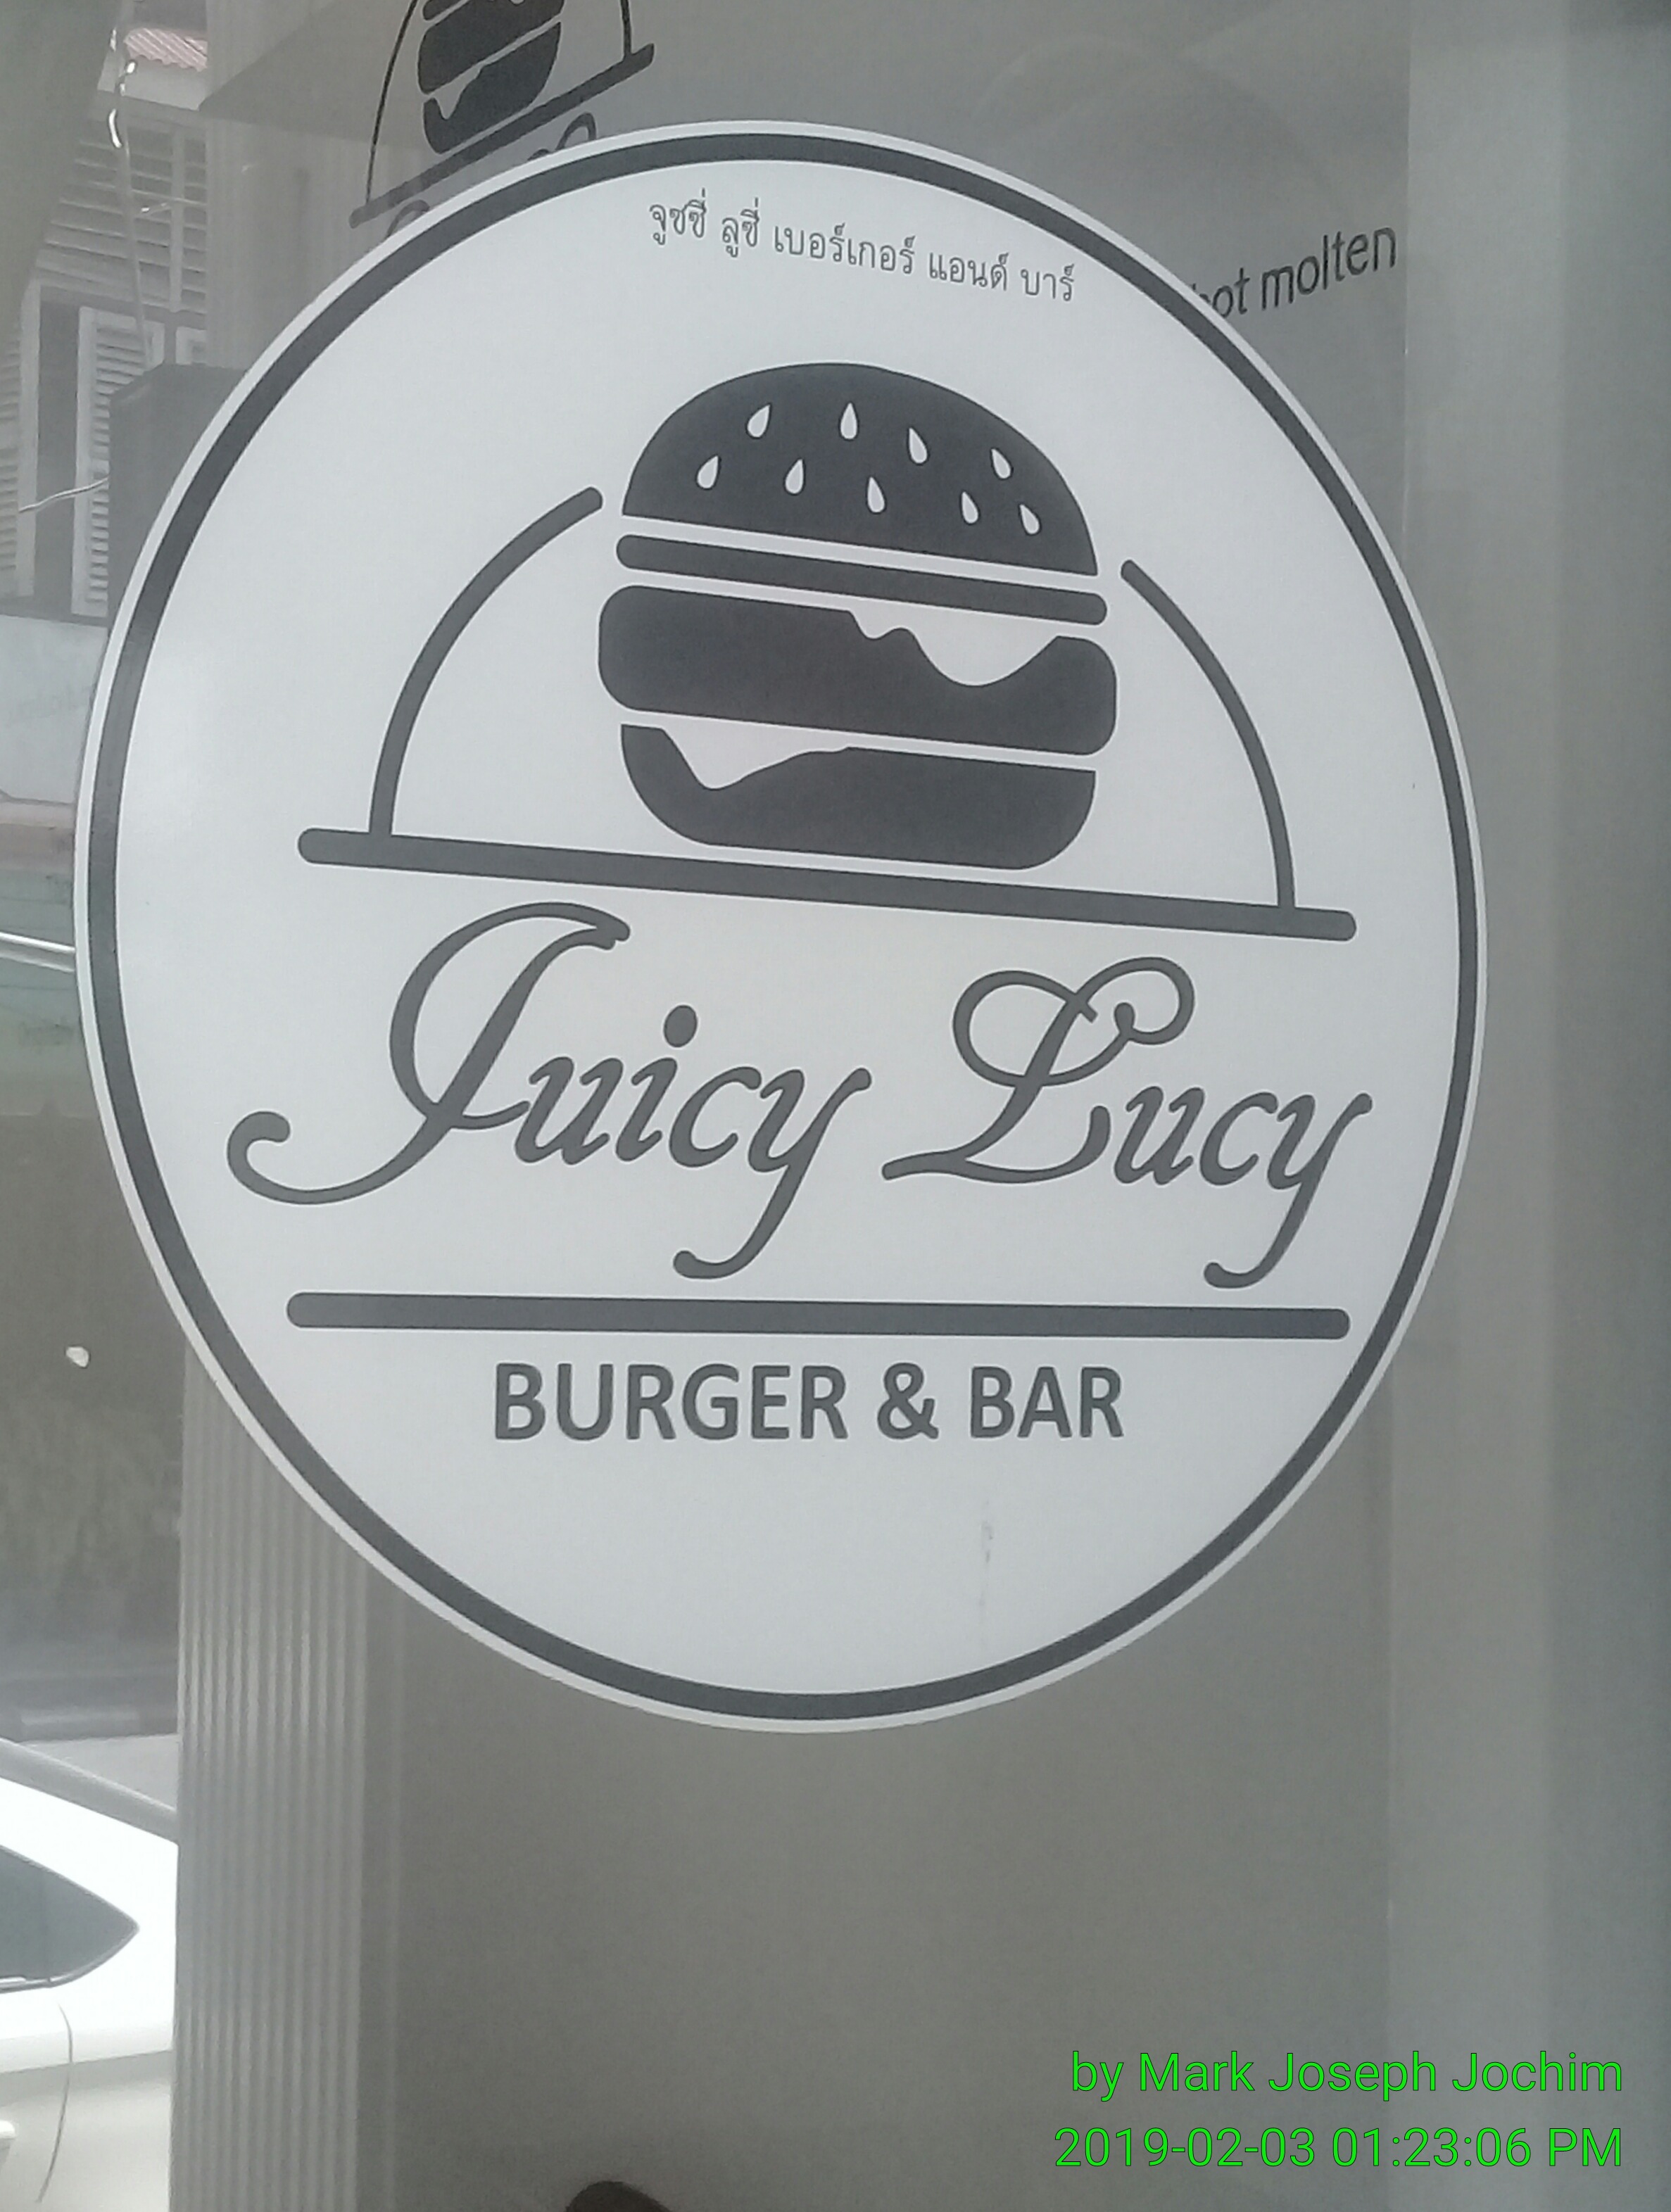 Juicy Lucy Burger & Bar in Phuket Old Town